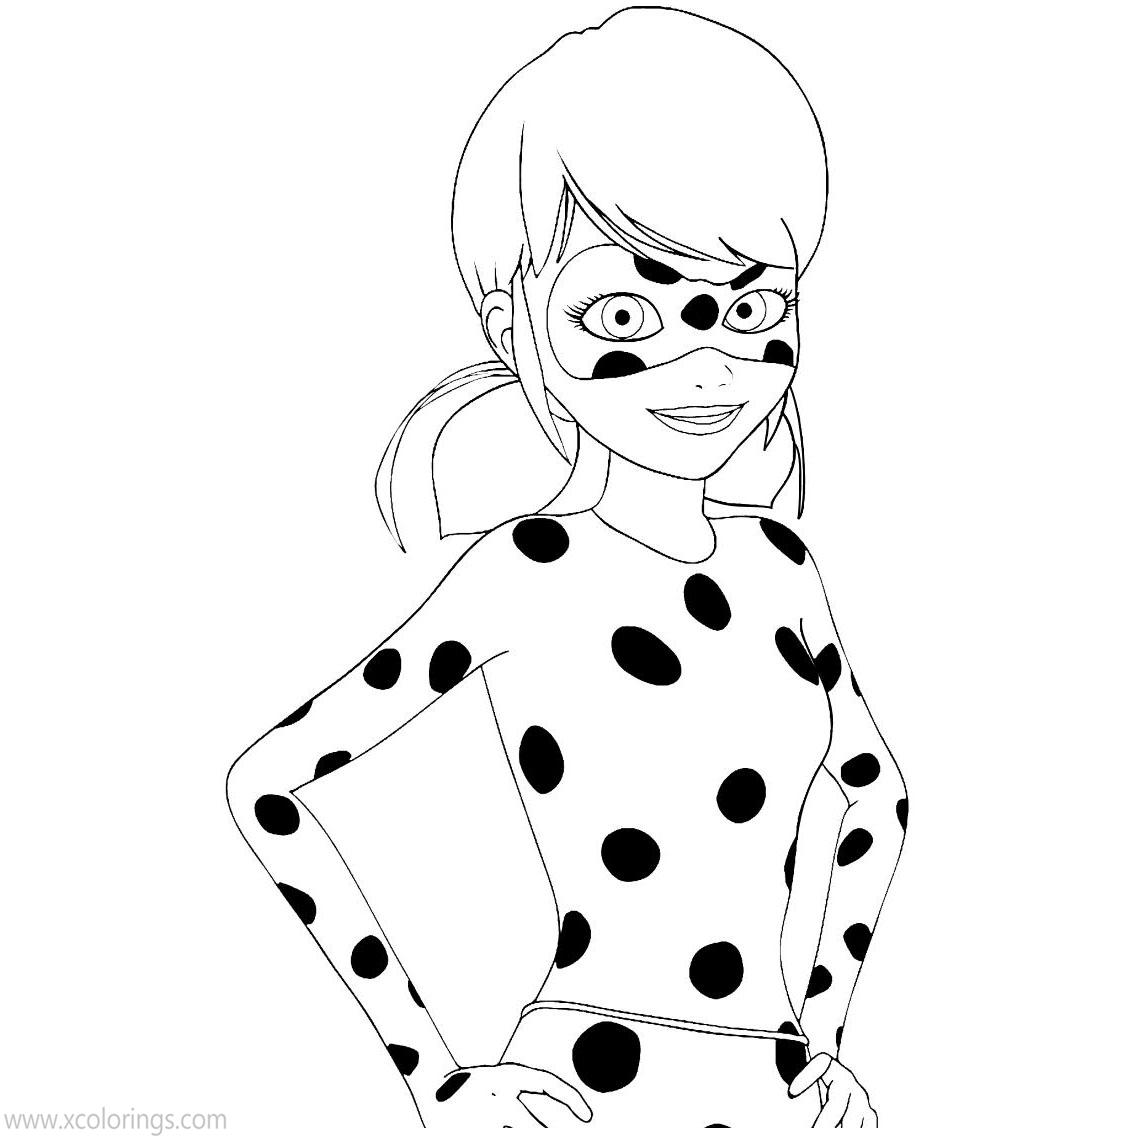 Miraculous Ladybug Coloring Pages Free to Print